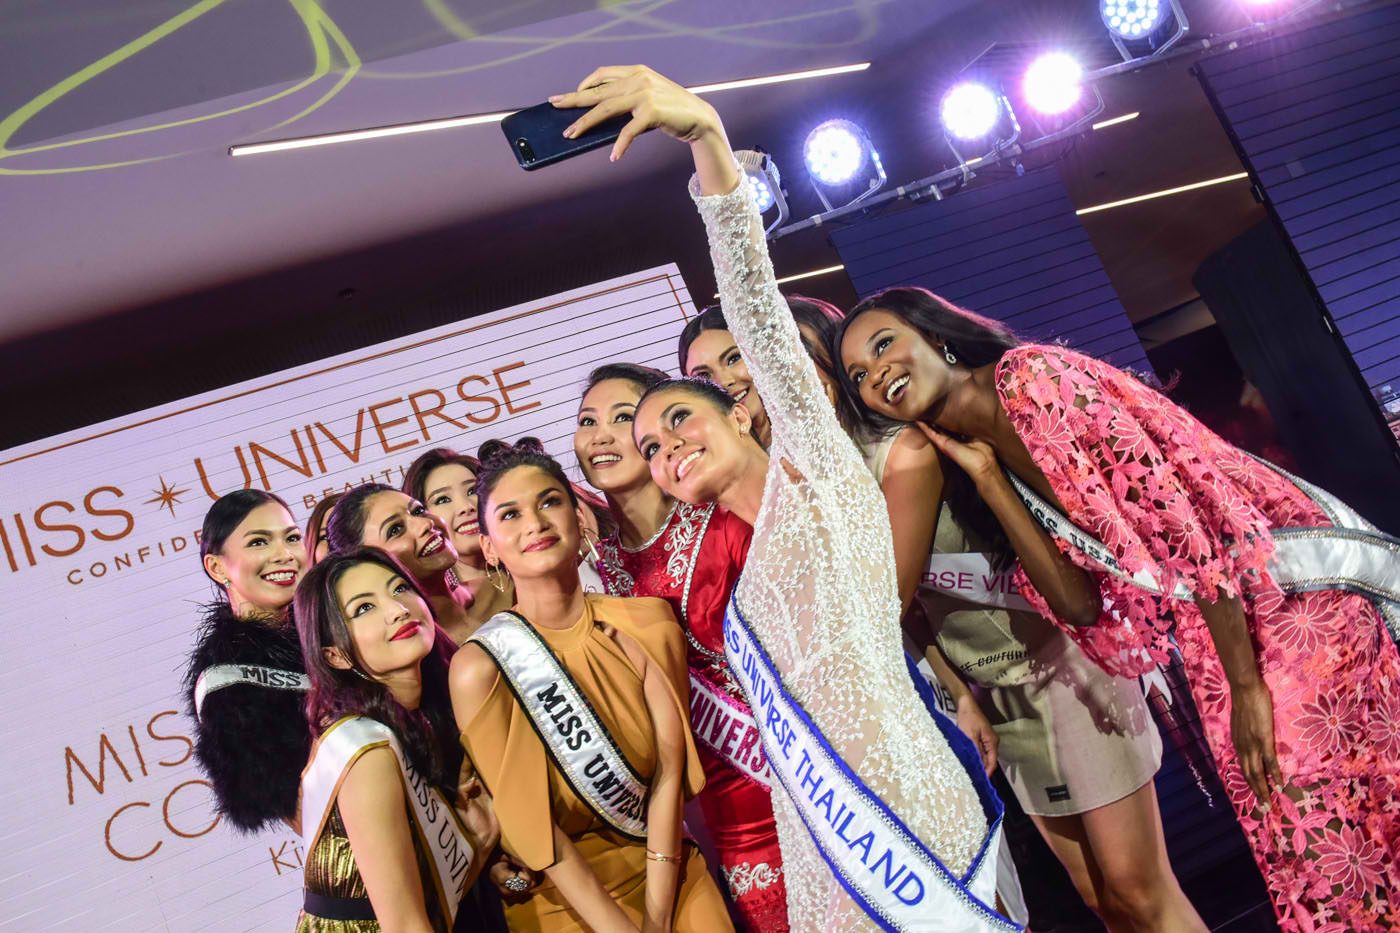 WATCH: Miss U is on! Queen Pia, candidates kick off pageant in PH